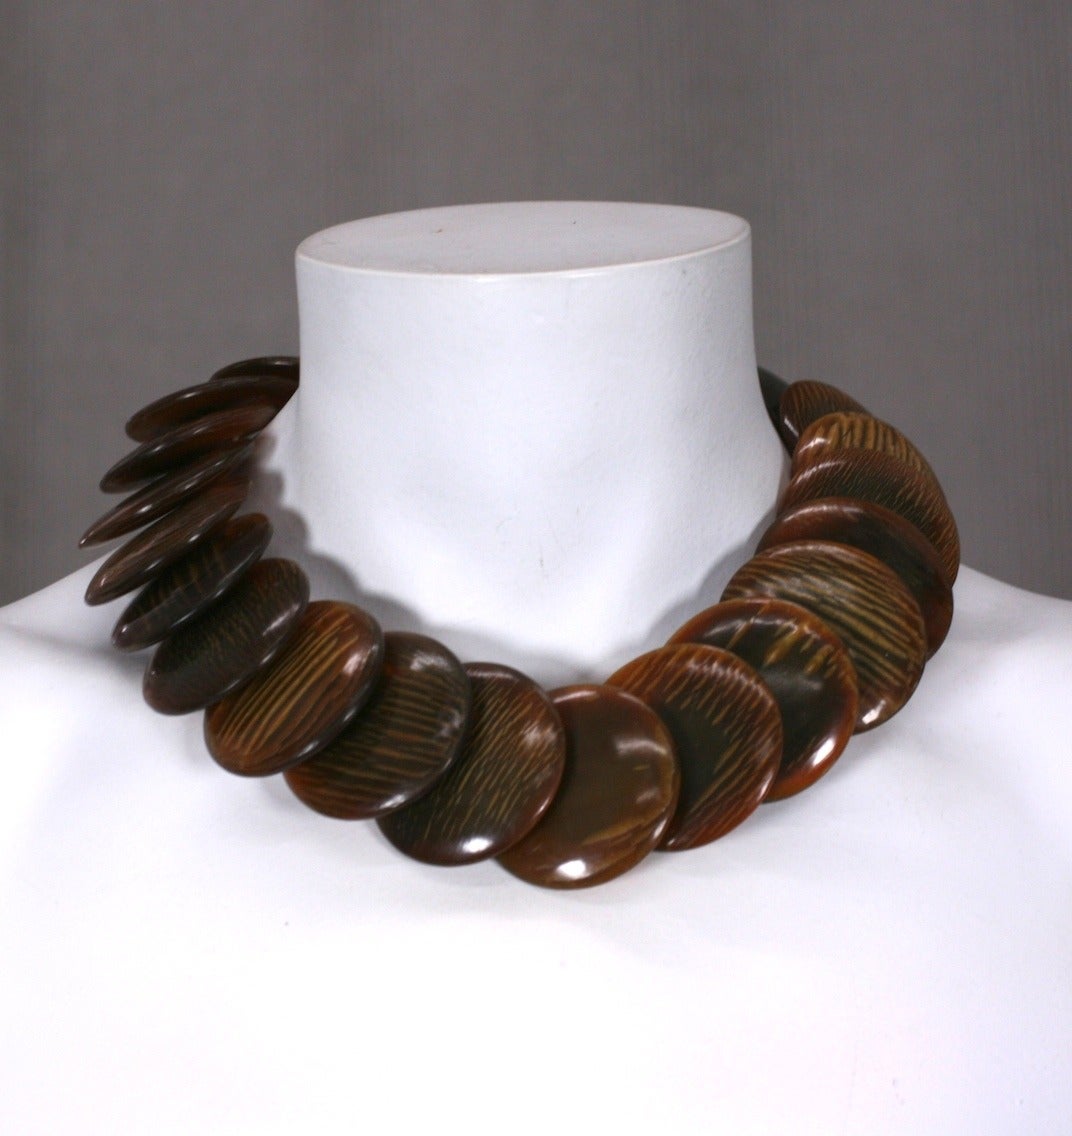 Monies faux Tortoise Disc Necklace by Gerda Lynggaard. Discs are bakelite or resin treated to have striations like an organic material. Very striking. 
15.5